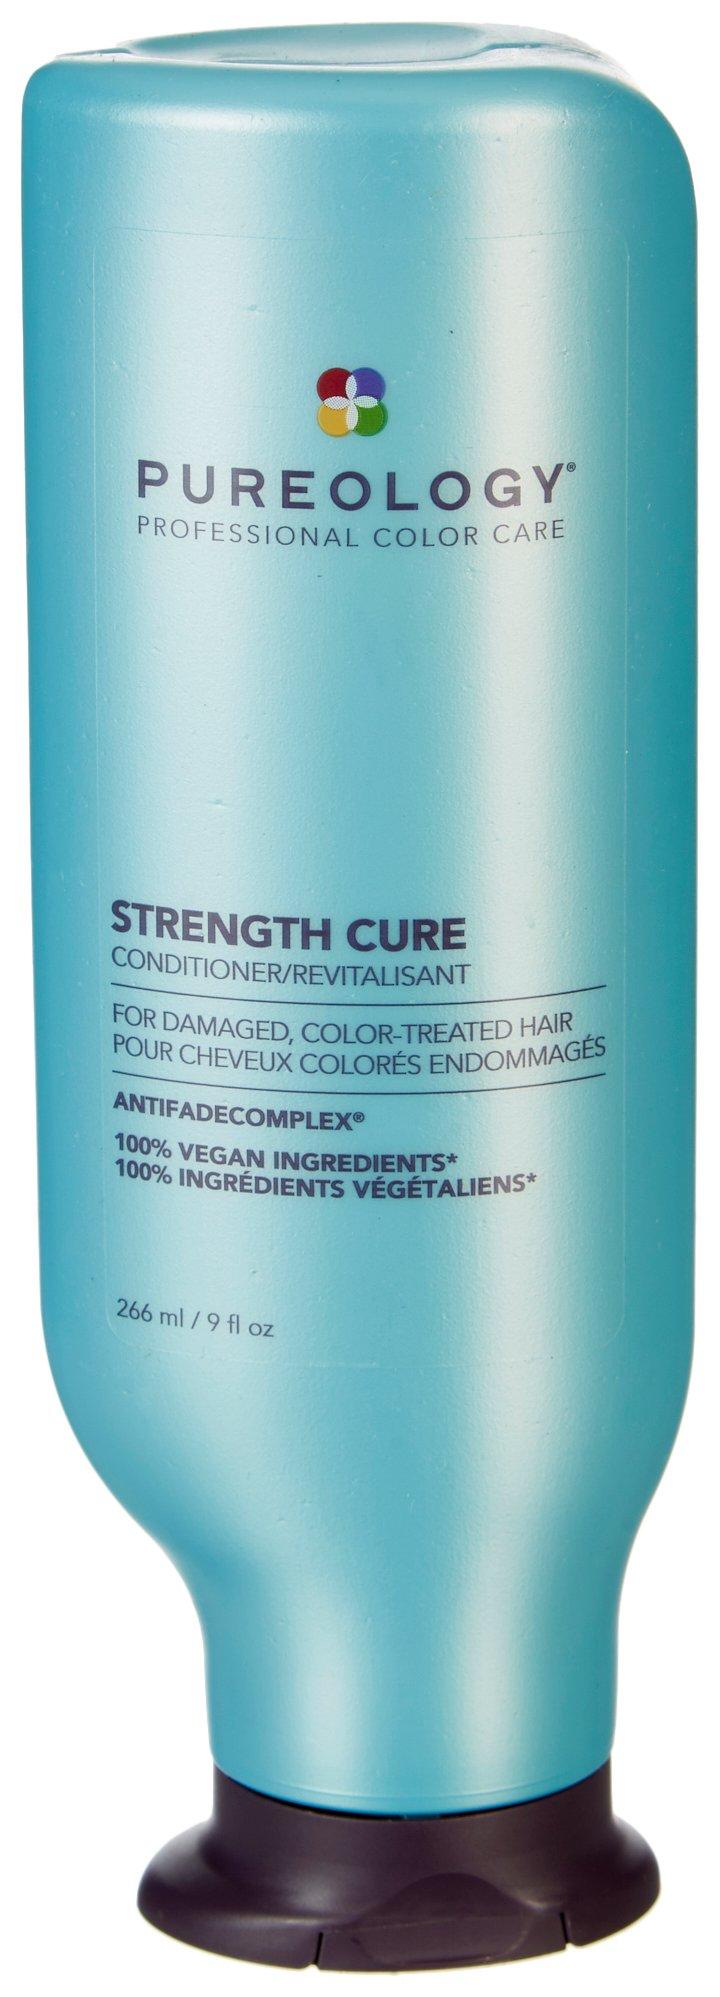 Strength Cure Conditioner For Color-Treated Hair